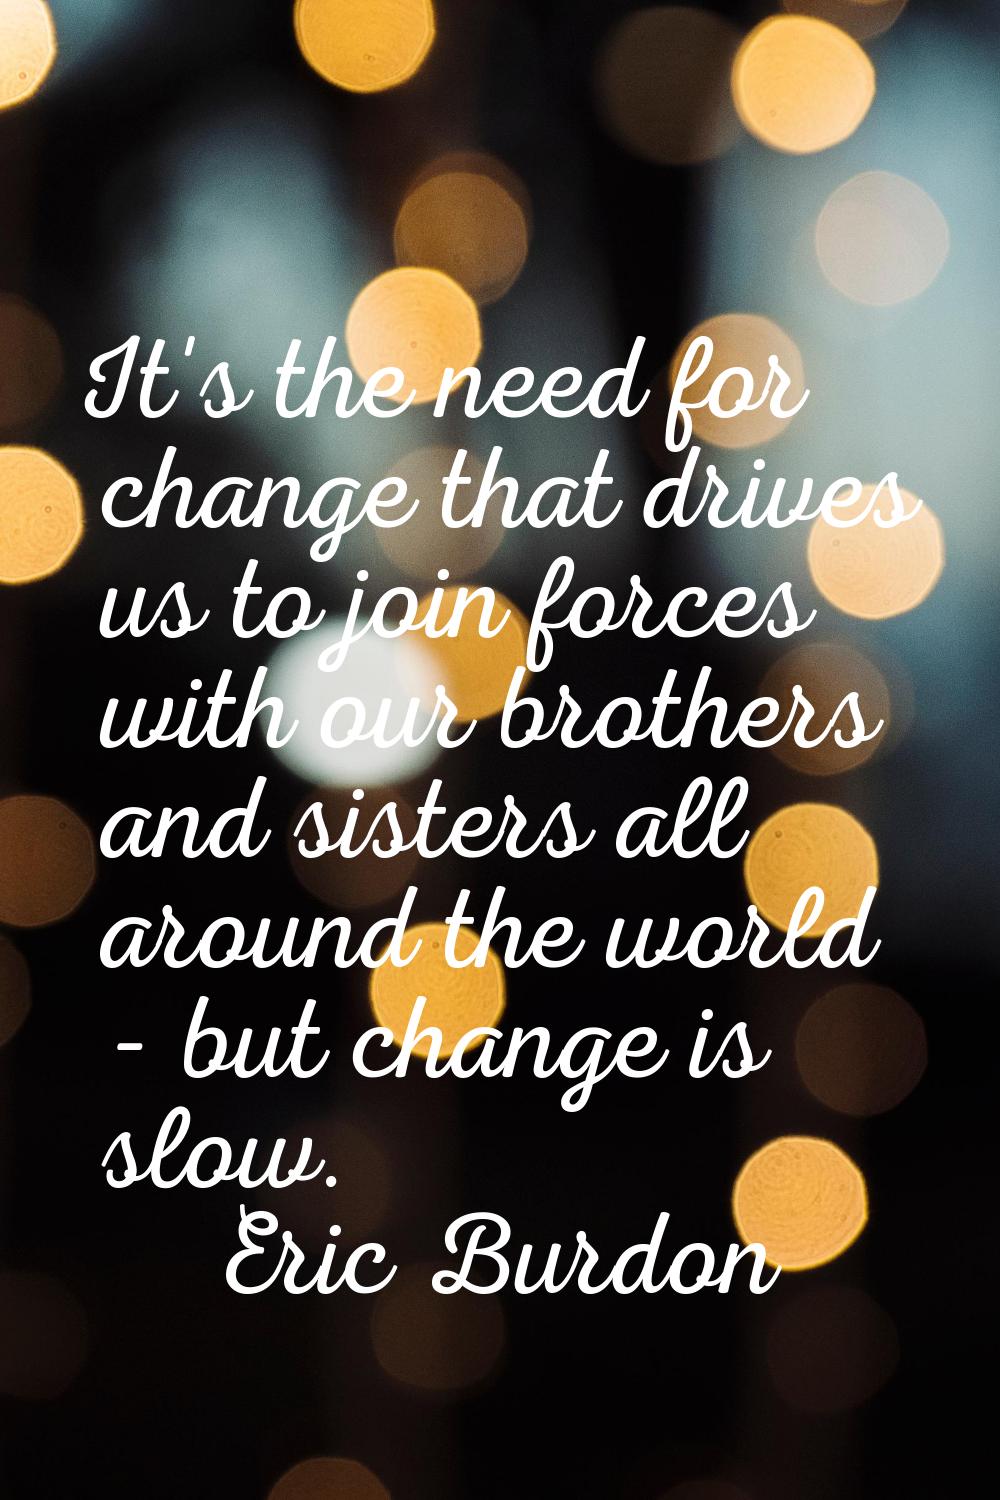 It's the need for change that drives us to join forces with our brothers and sisters all around the